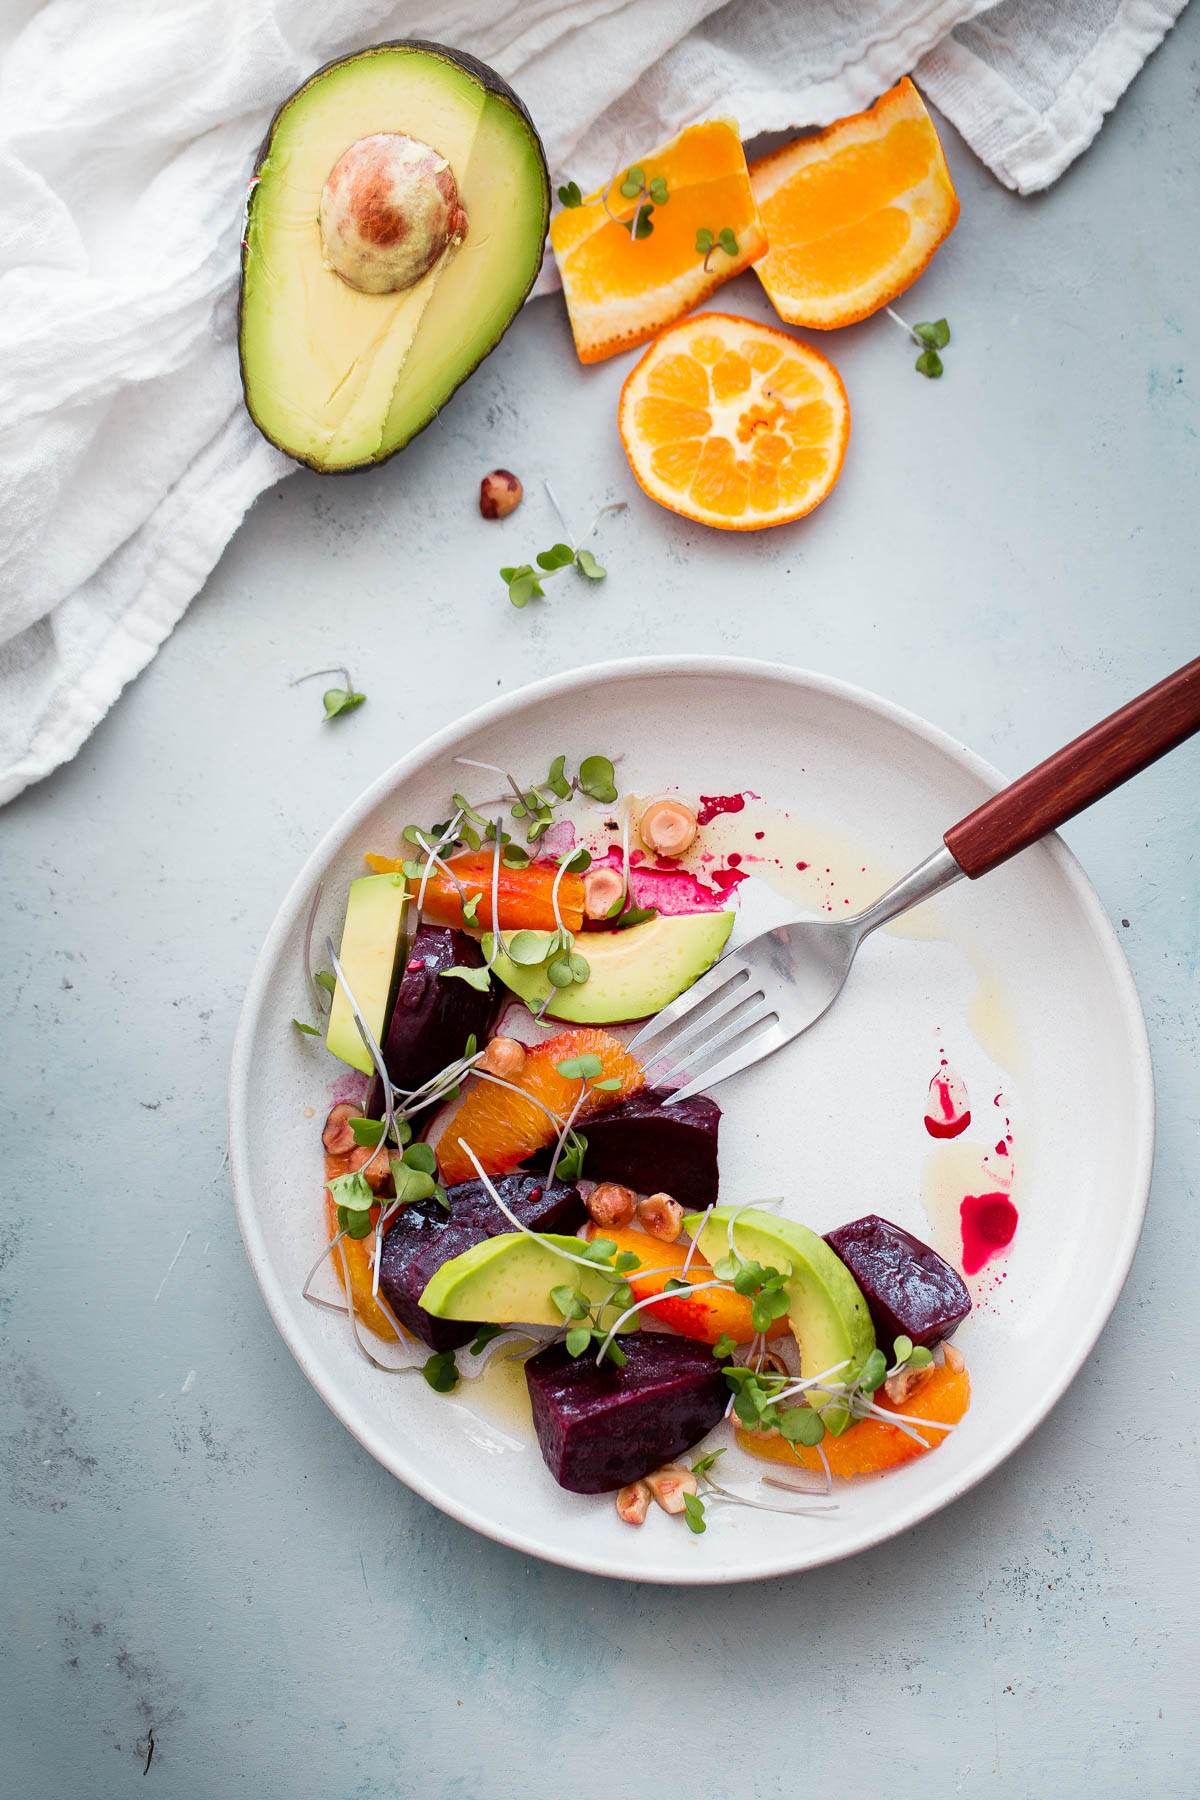 Roasted Beet Salad with Citrus and Avocado